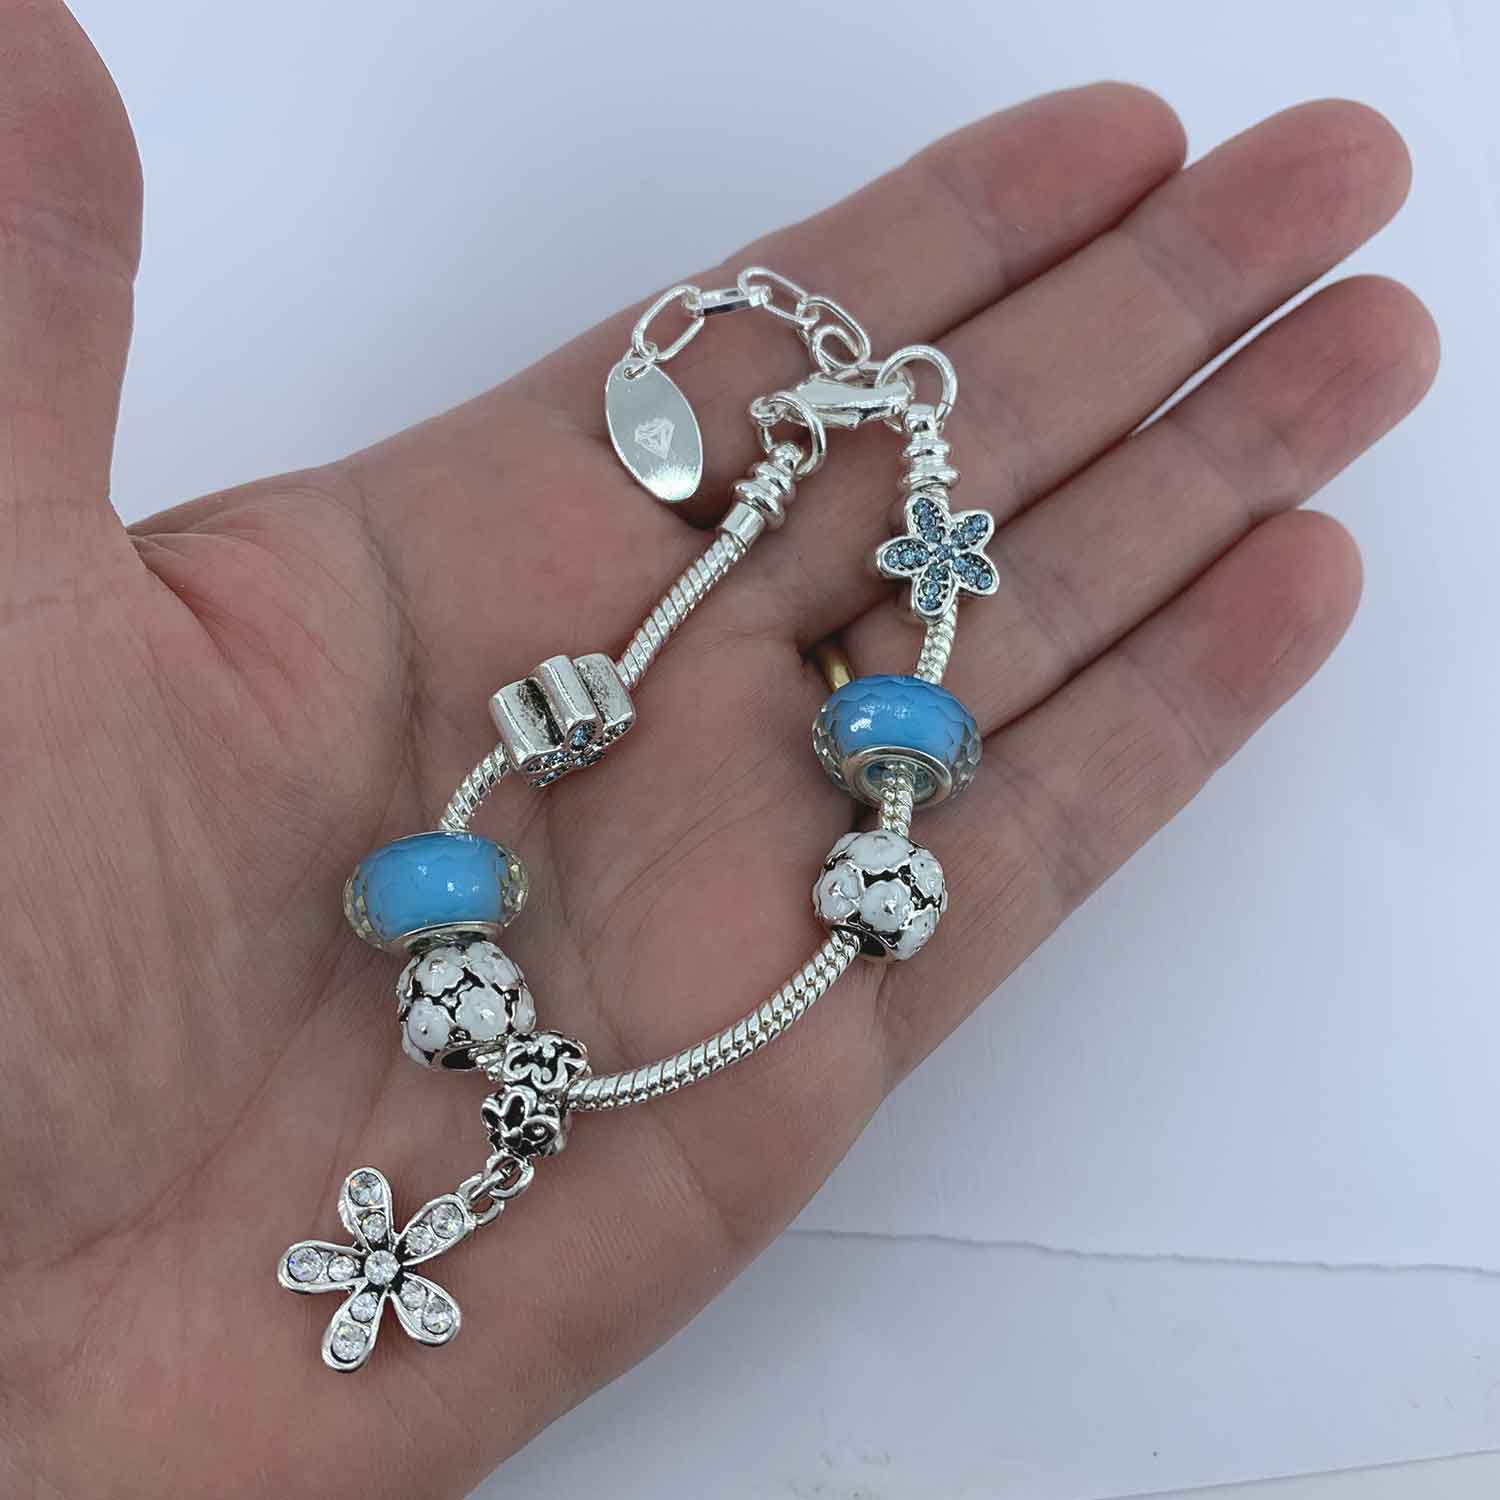 Custom Charm Bracelet Personalized Expandable Bangle Customize Your Own  Affordable Jewelry Gift for Her - Etsy | Custom bracelet personalized  jewelry, Custom charm bracelet, Bangle bracelets with charms